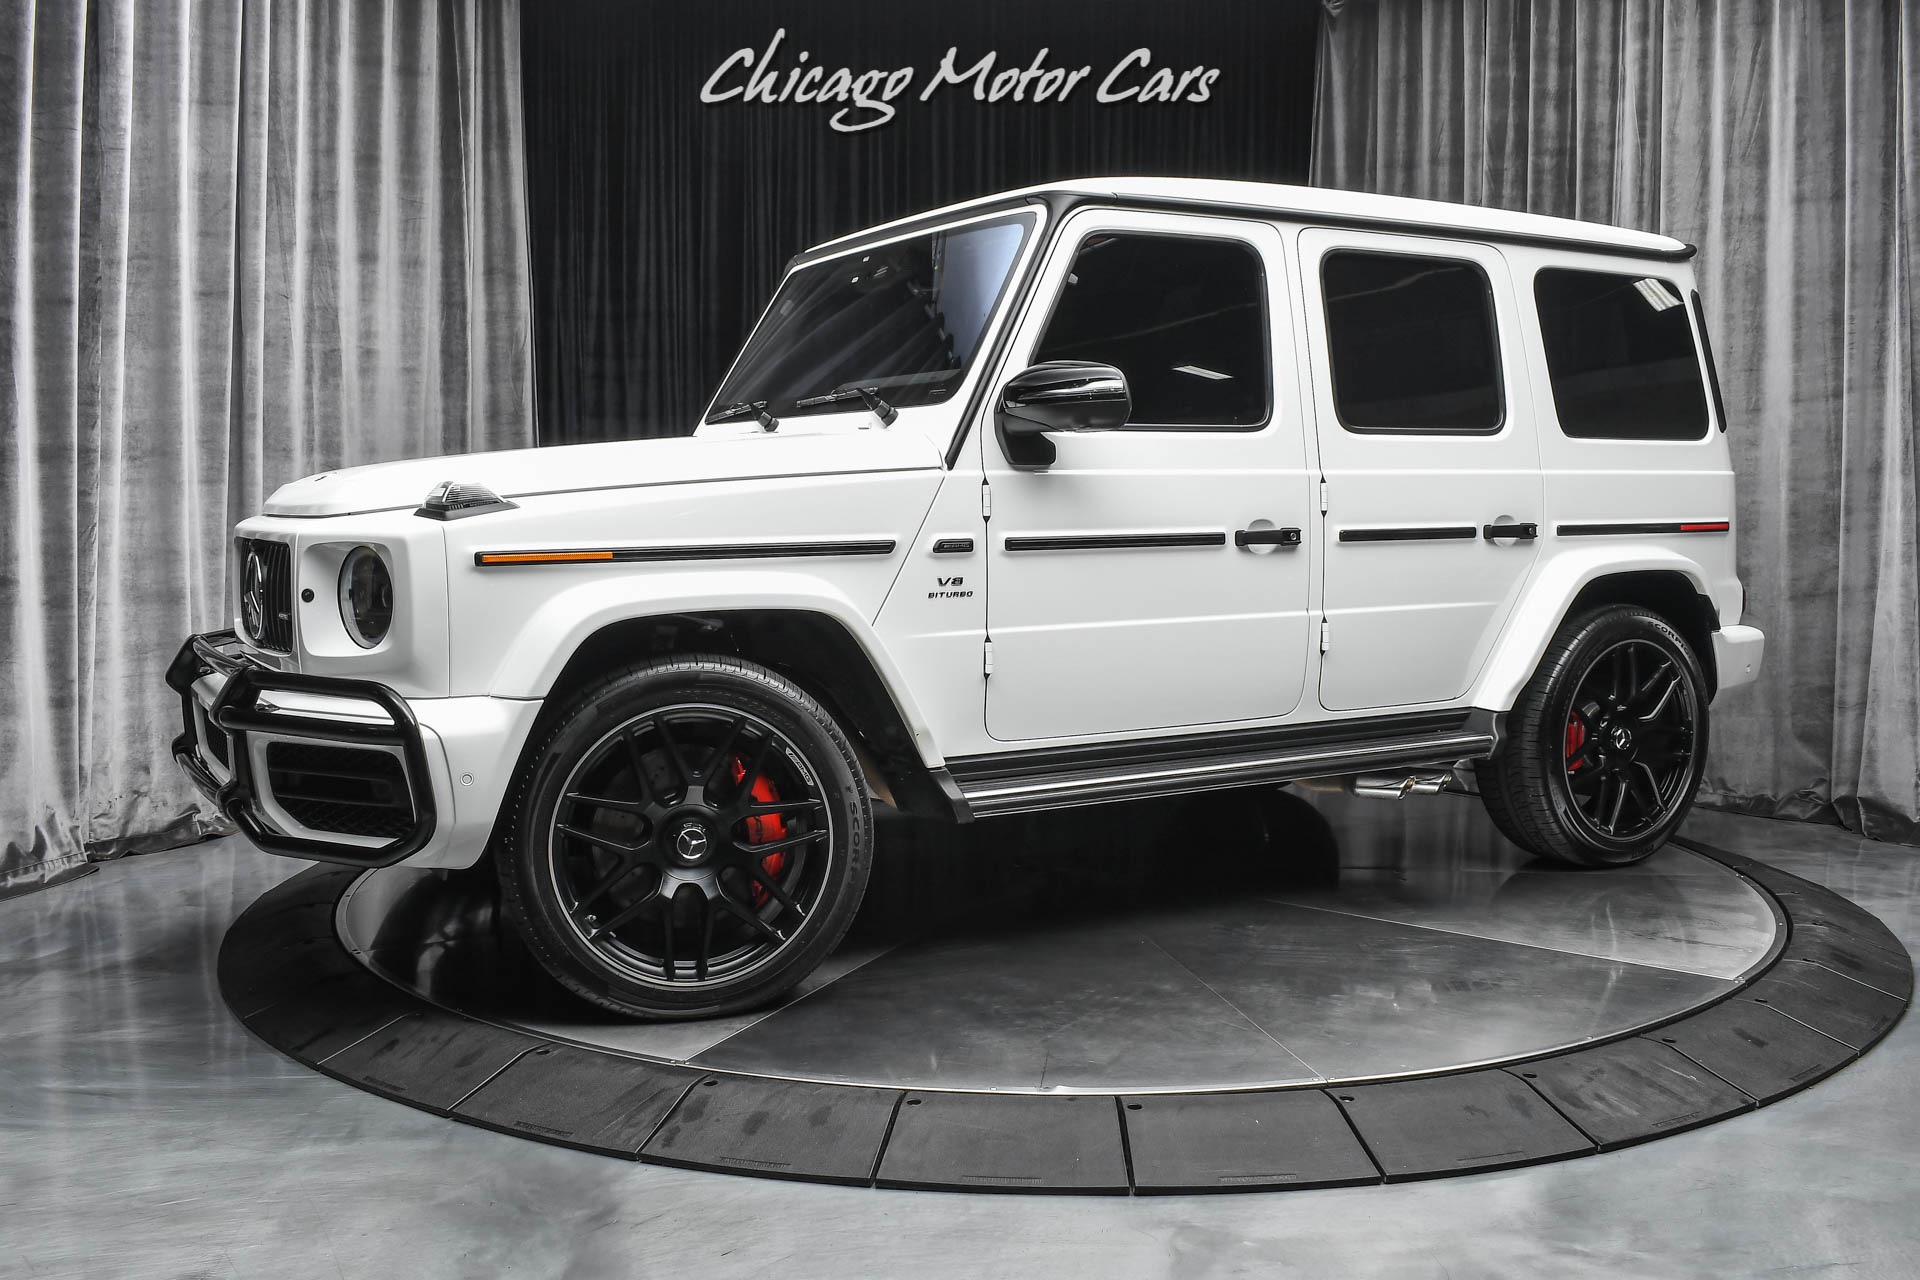 Used Mercedes Benz G63 Amg G63 G Manufaktur Interior Package Hot White On Red Carbon Fiber For Sale Special Pricing Chicago Motor Cars Stock